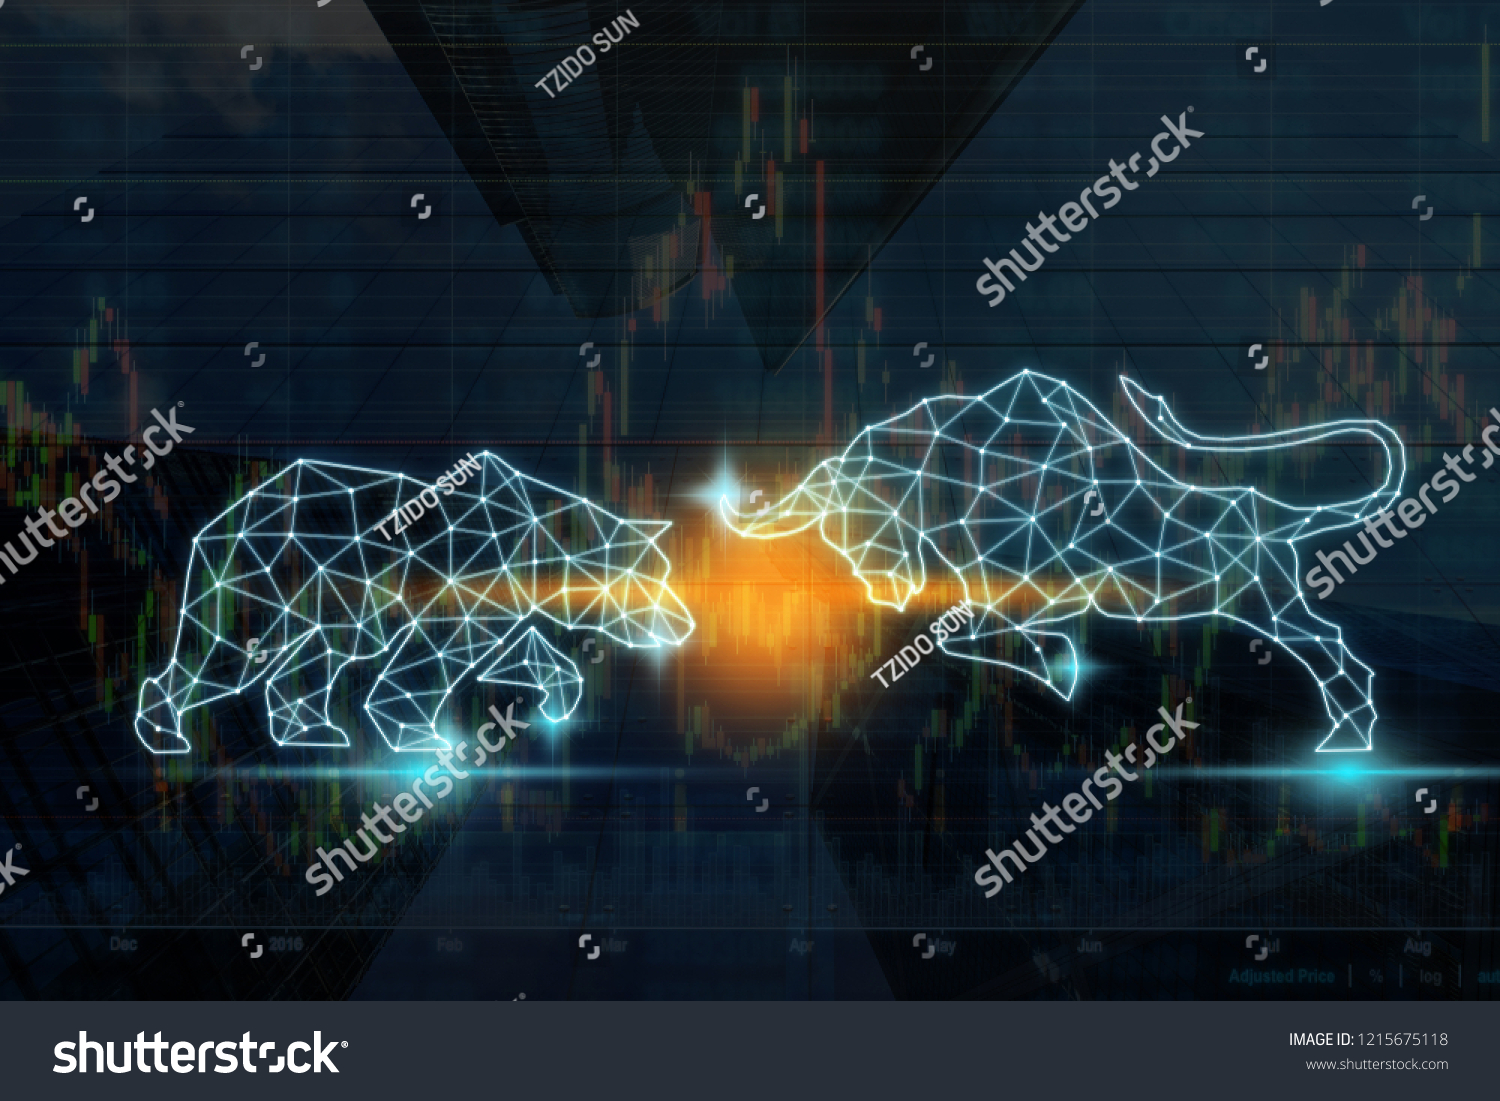 polygonal bull and bear shape writing by lines and dots over the Stock market chart with information over the Modern business building glass of skyscrapers, trading and finance investment concept #1215675118